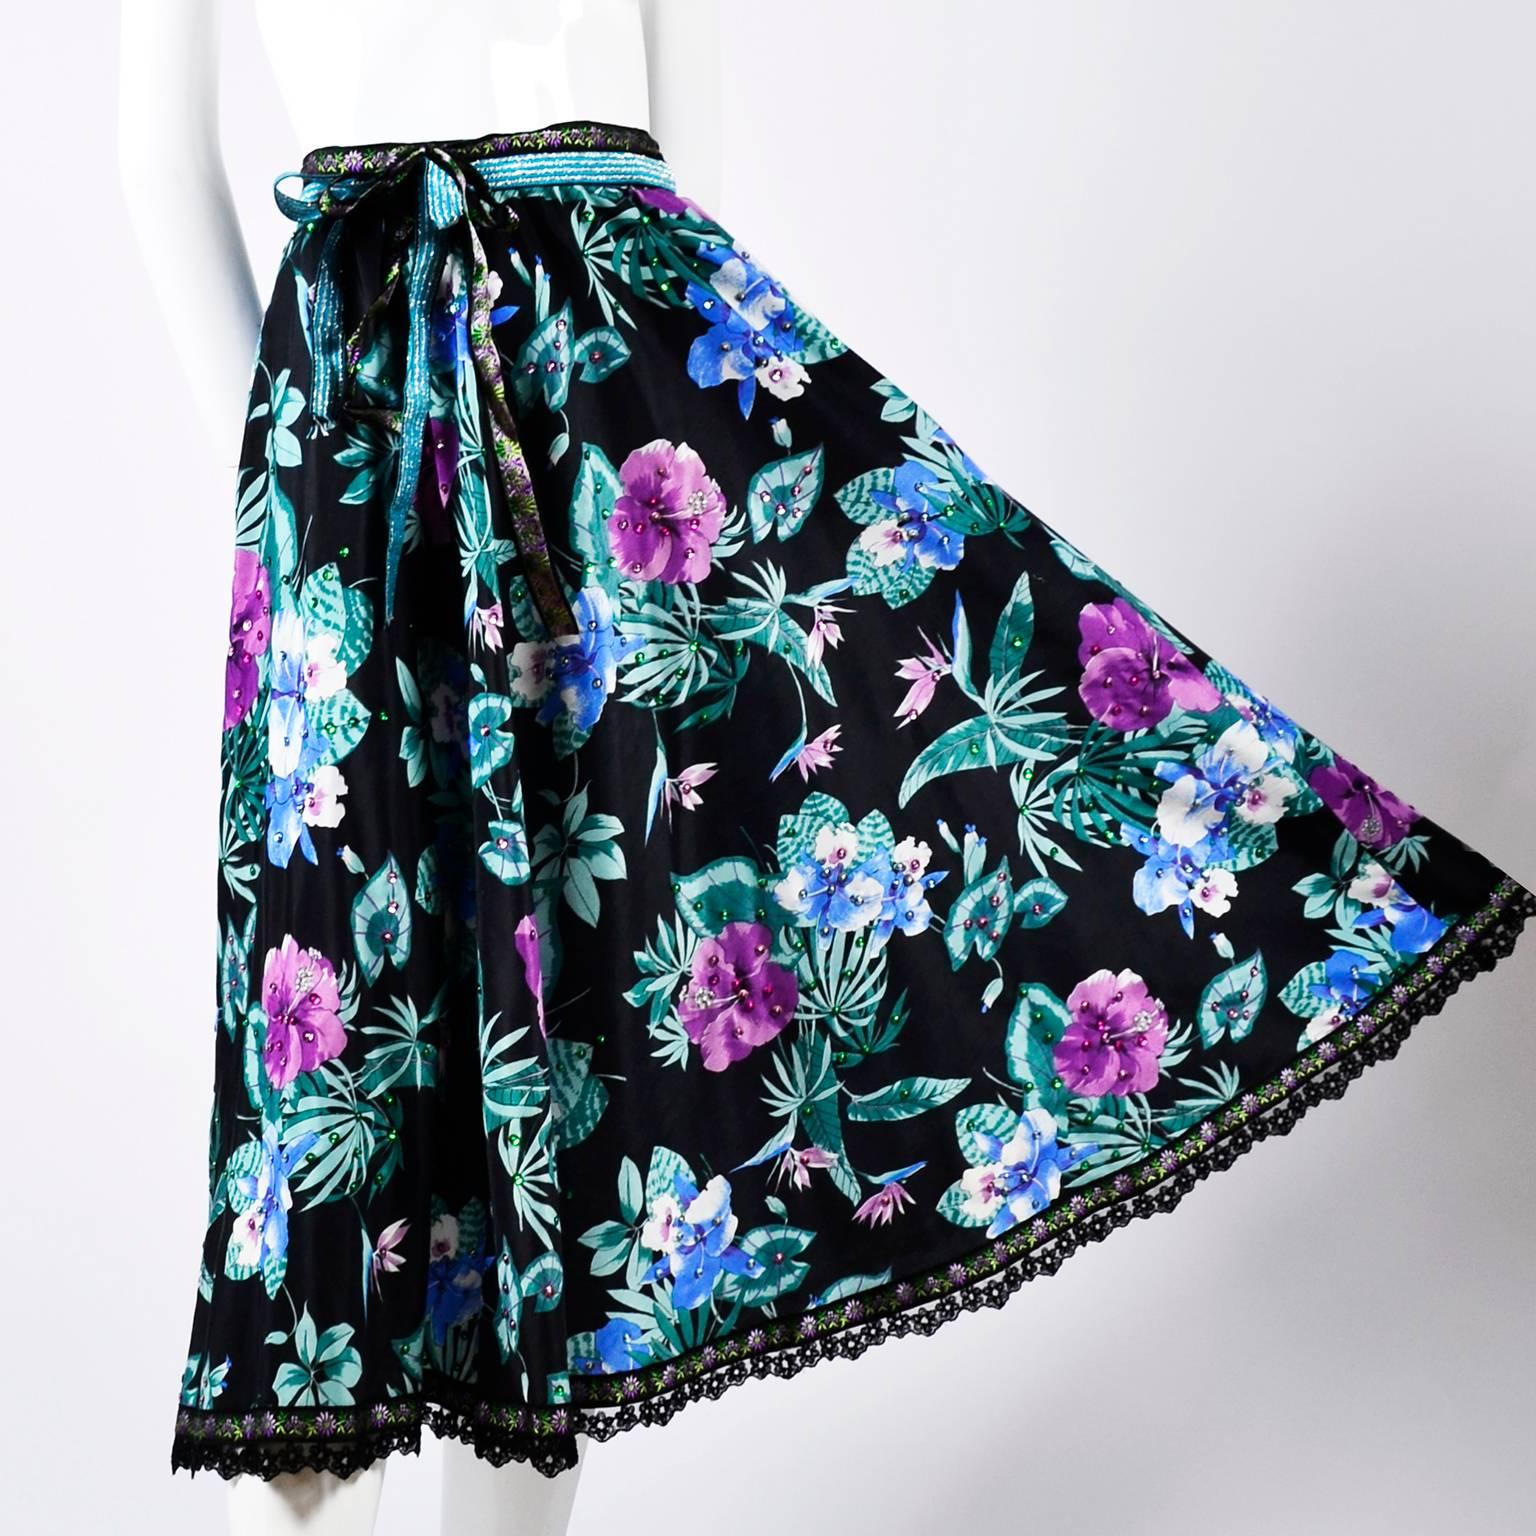 This floral cotton vintage skirt was designed by Giorgio di Sant' Angelo and is embellished with colorful sequins and trimmed at the hemline with lace and embroidered ribbon.  The skirt was purchased at I Magnin in the late 1980's and has its